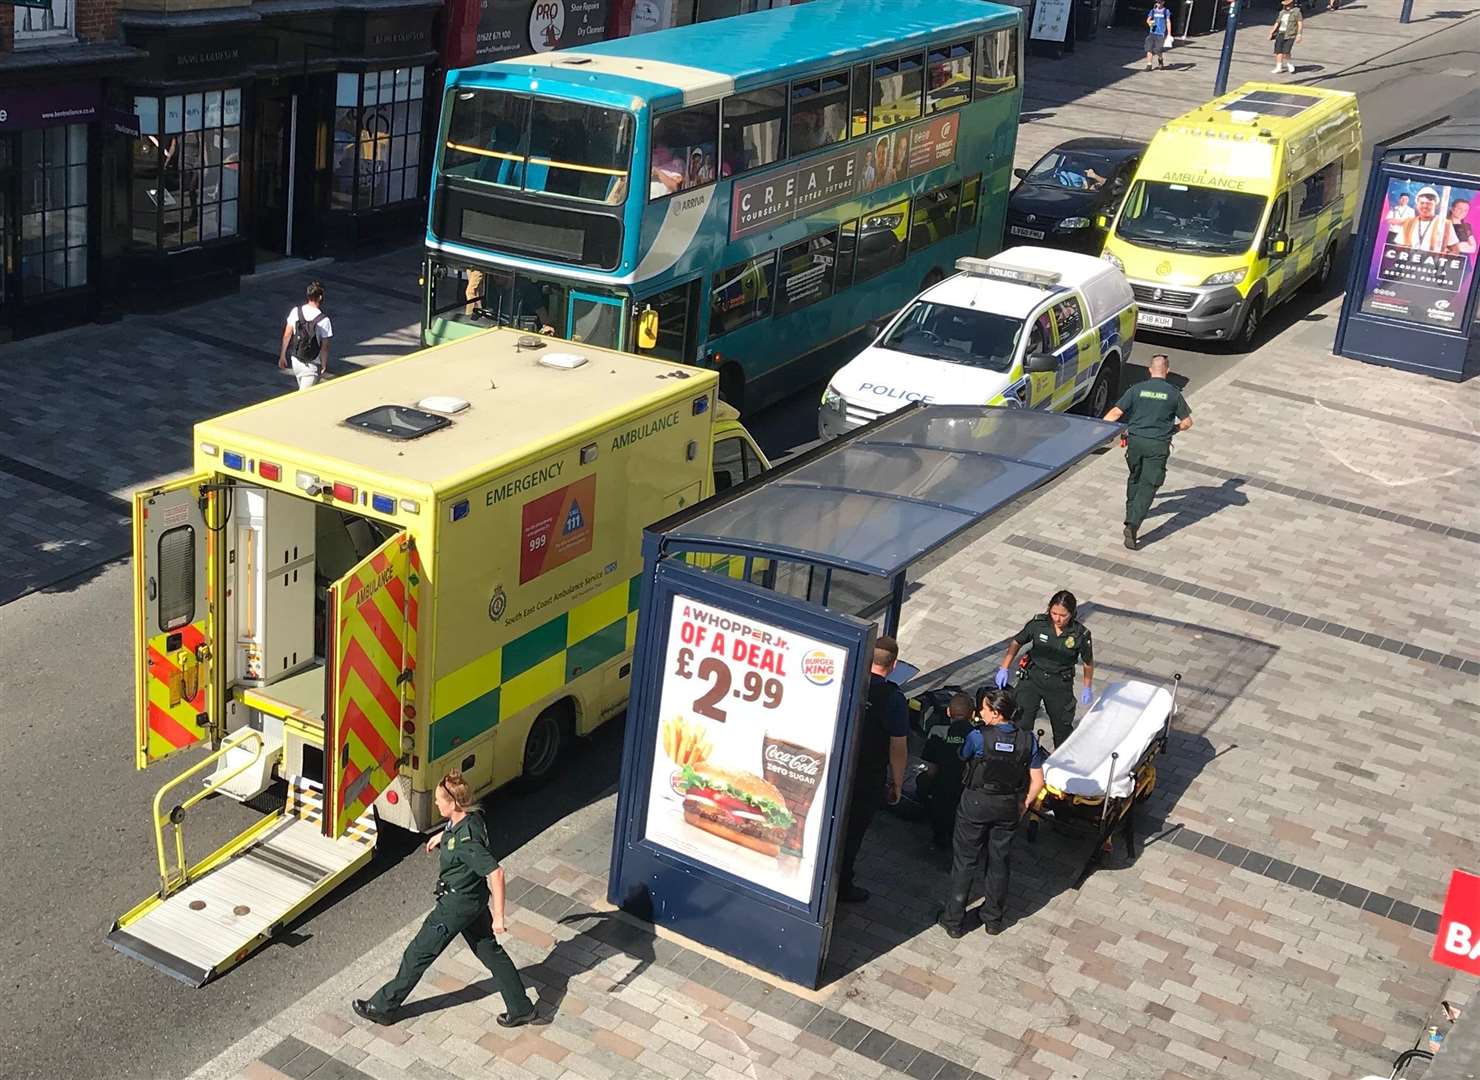 Police and medics are treating a woman who collapsed in Maidstone's High Street